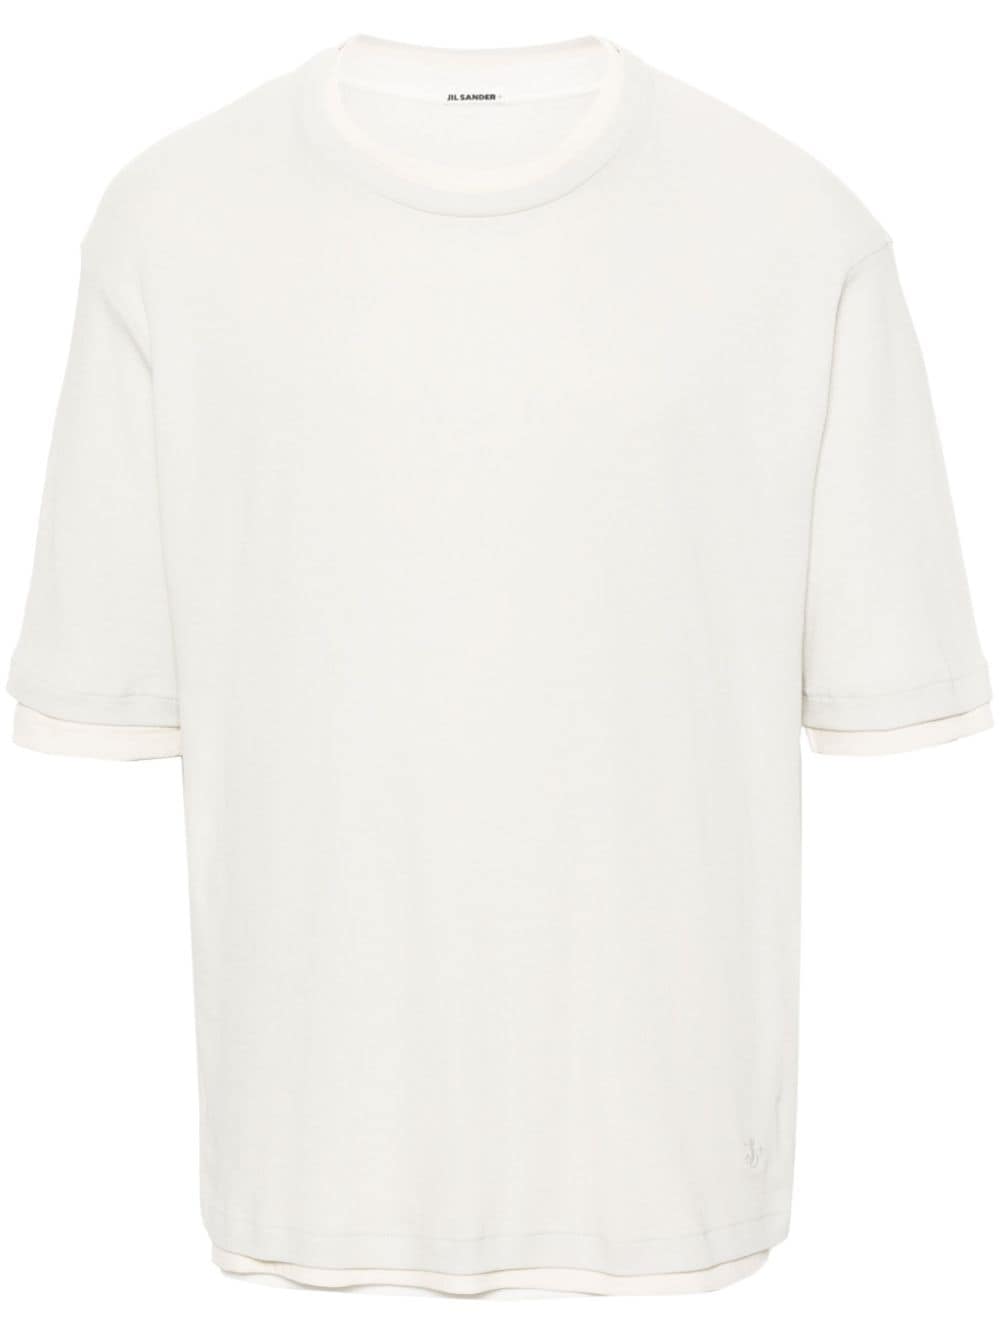 Jil Sander layered cotton T-shirts and top (pack of three) - White